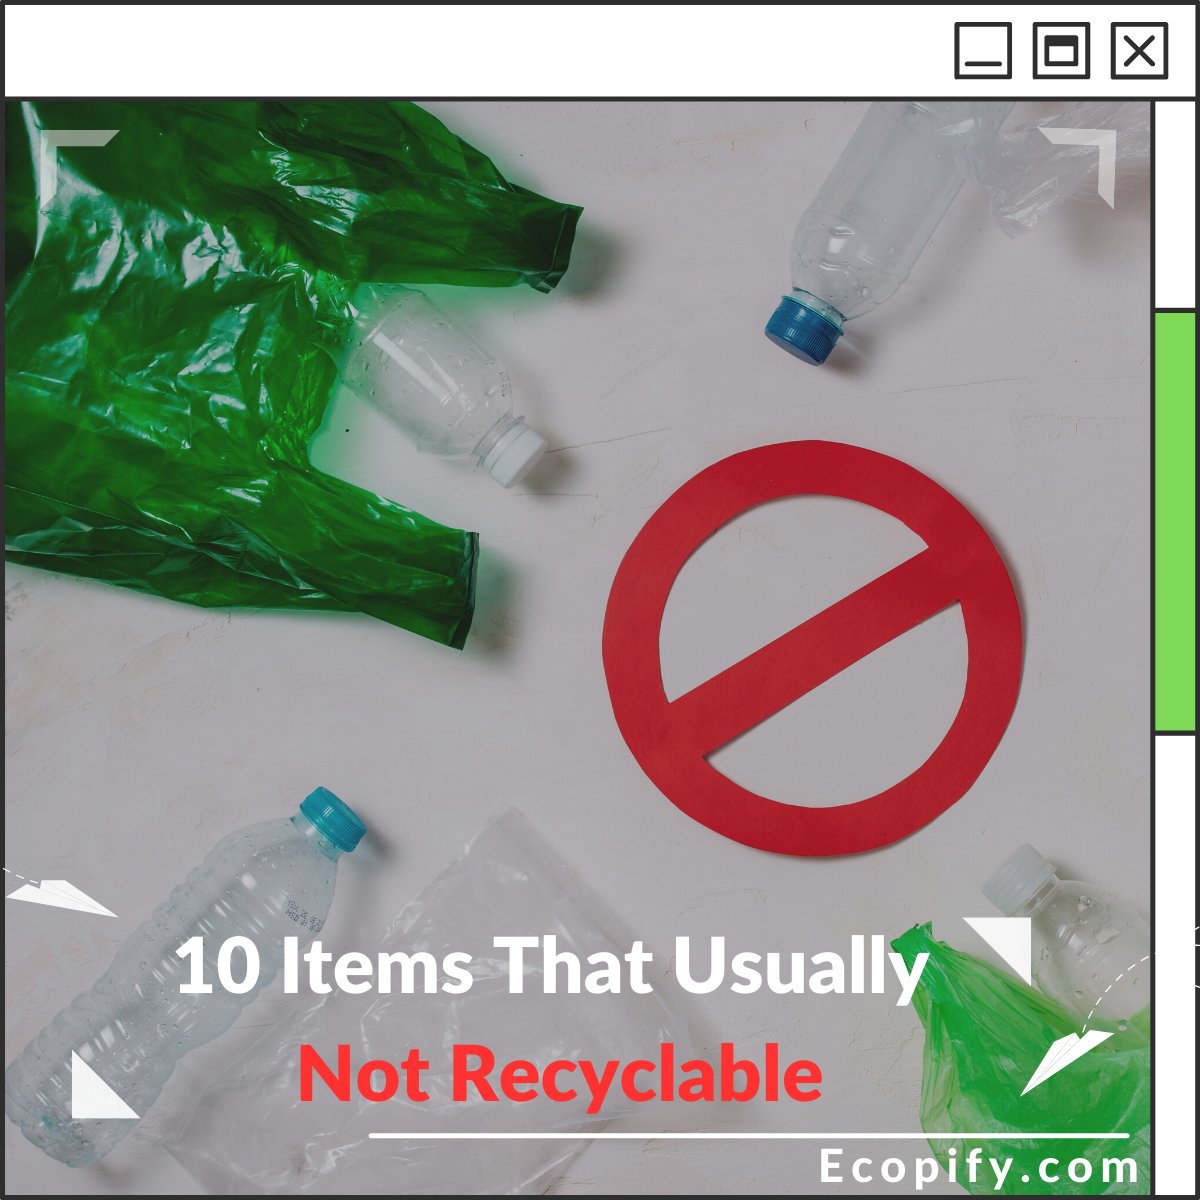 Are Plastic Hangers Recyclable? The Answer is a Little Complicated